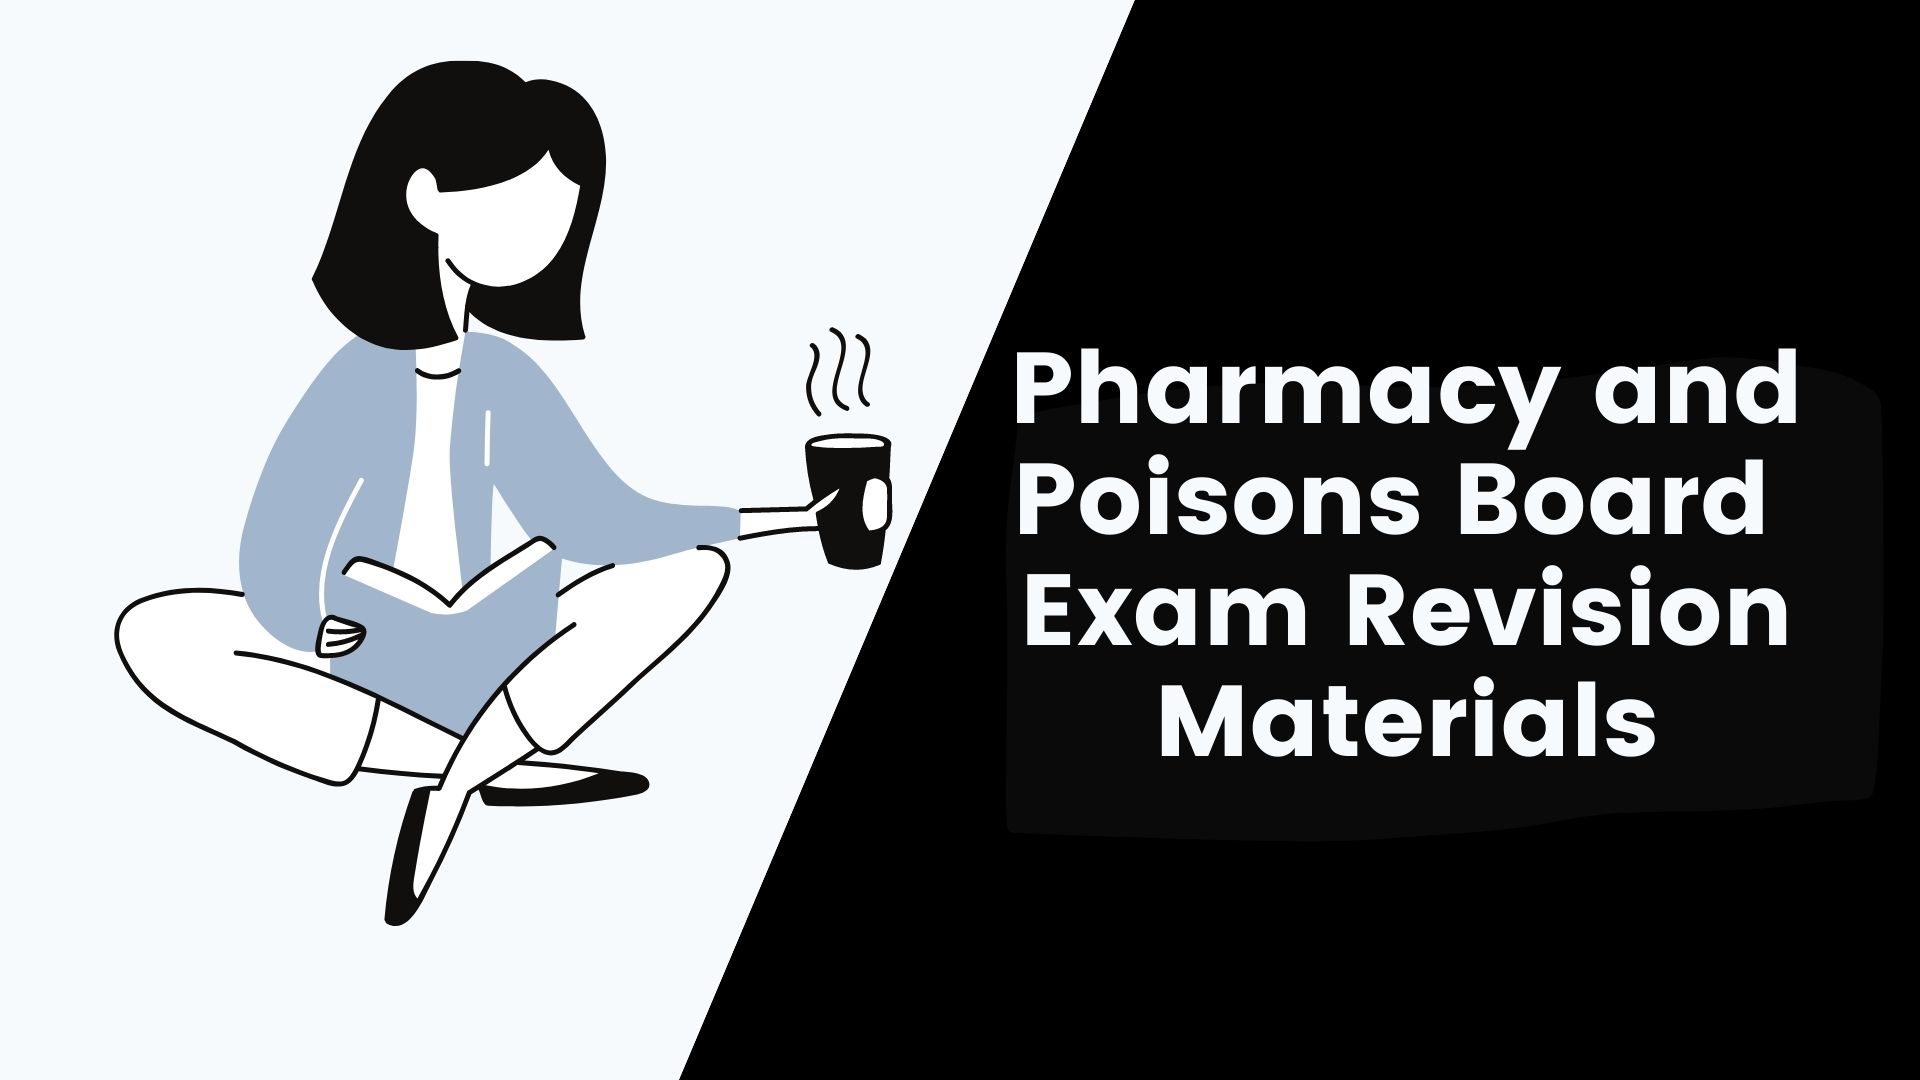 Pharmacy and Poisons Board class notes, exam revision papers